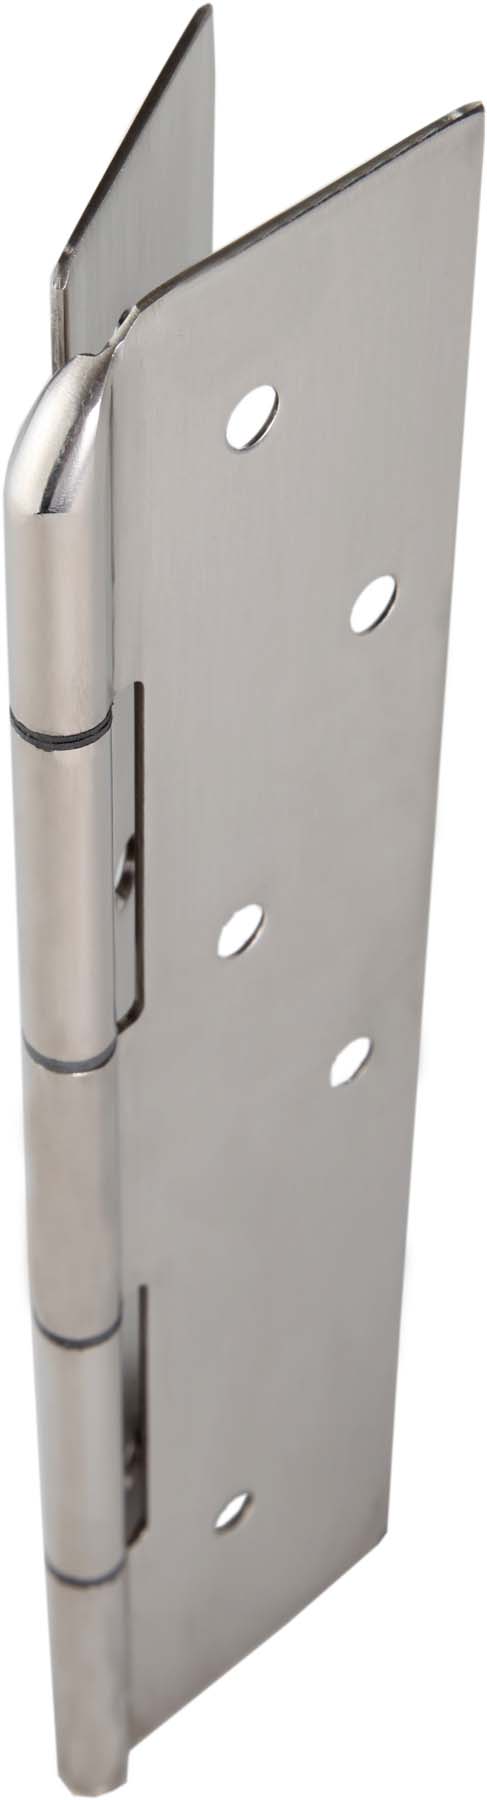 Continuous stainless steel concealed hinge with ligature resistant hospital tip